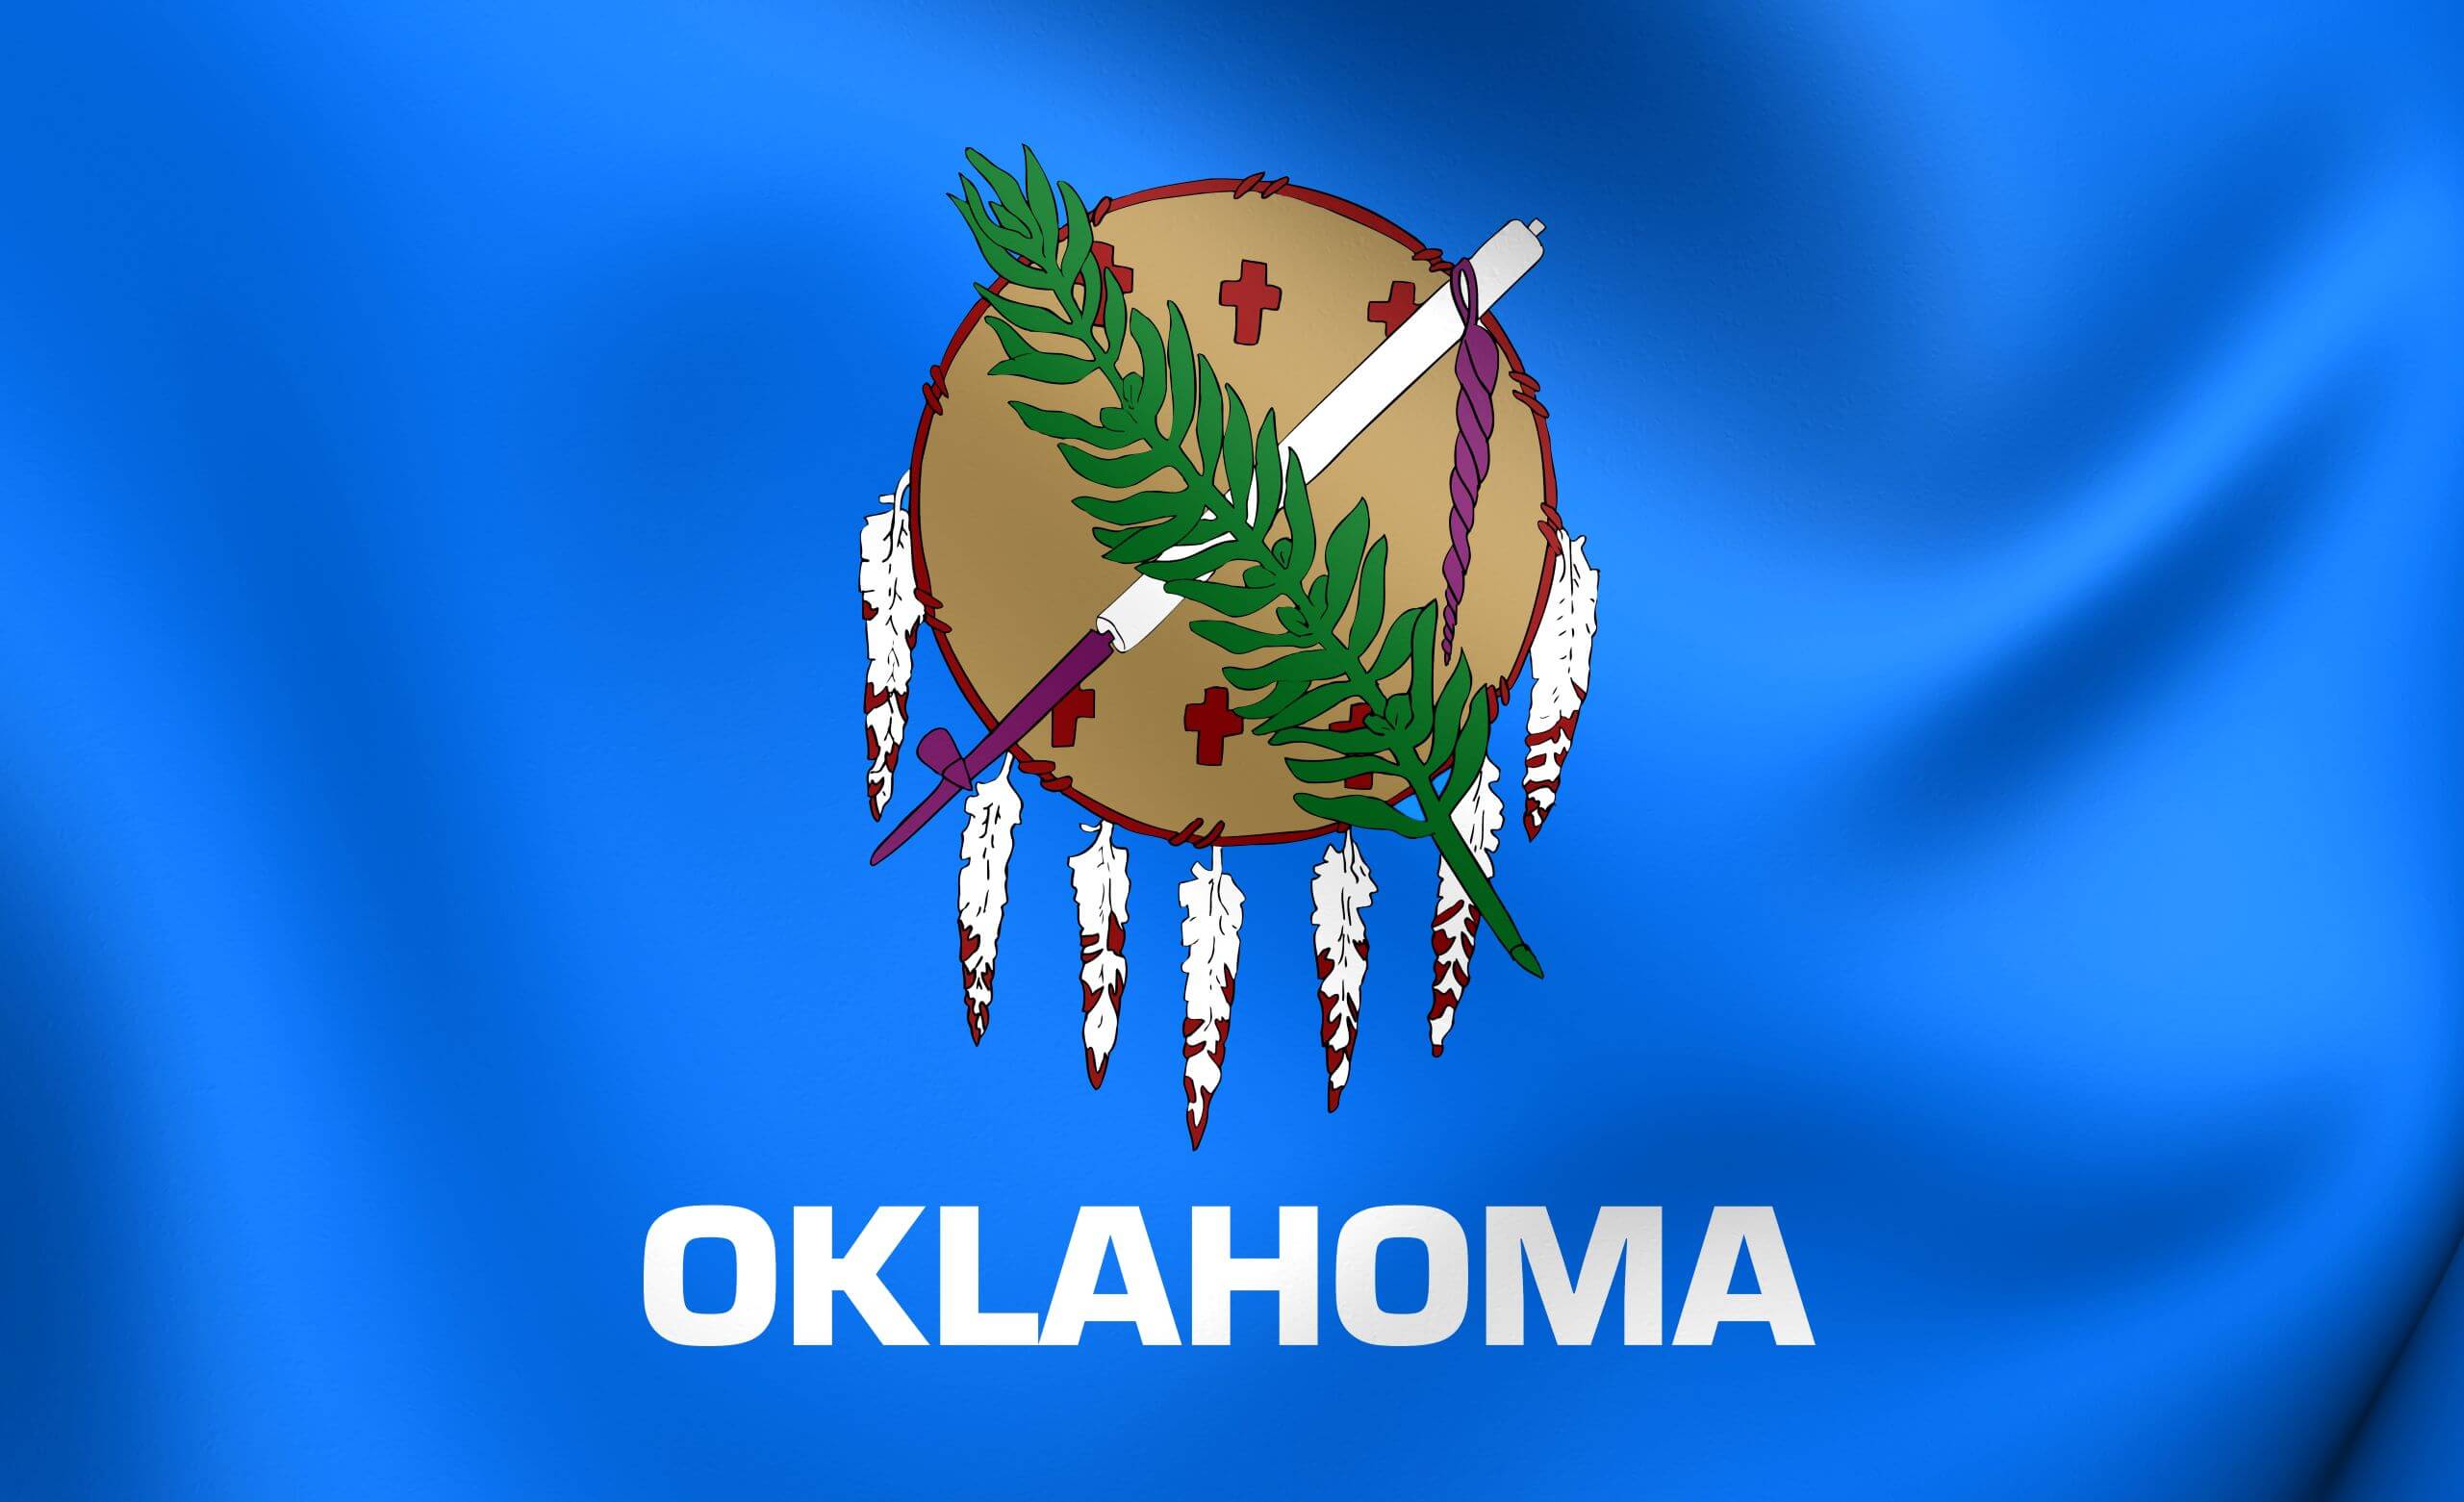 An image of the Oklahoma state flag.